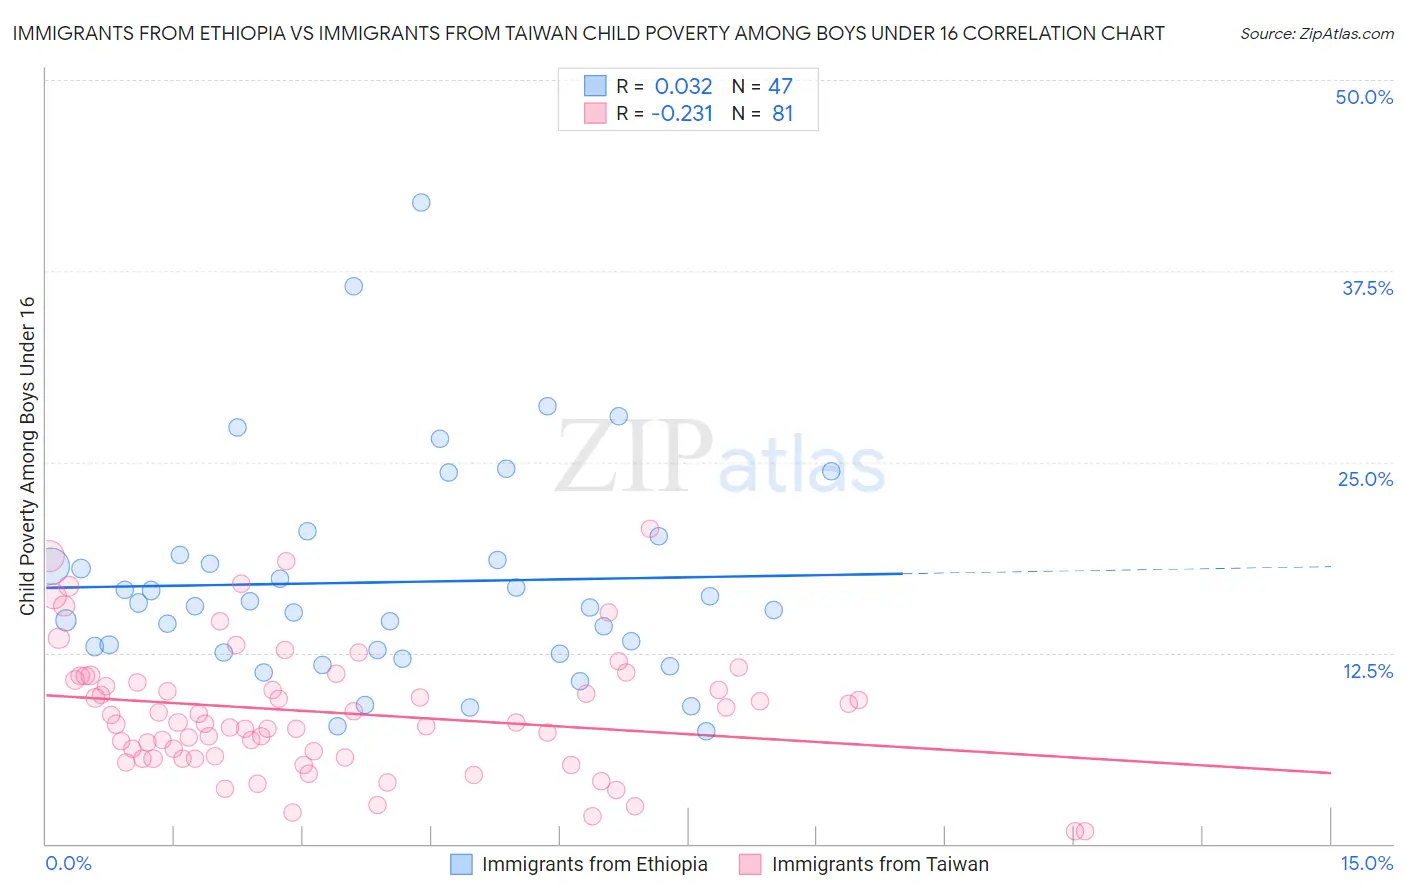 Immigrants from Ethiopia vs Immigrants from Taiwan Child Poverty Among Boys Under 16